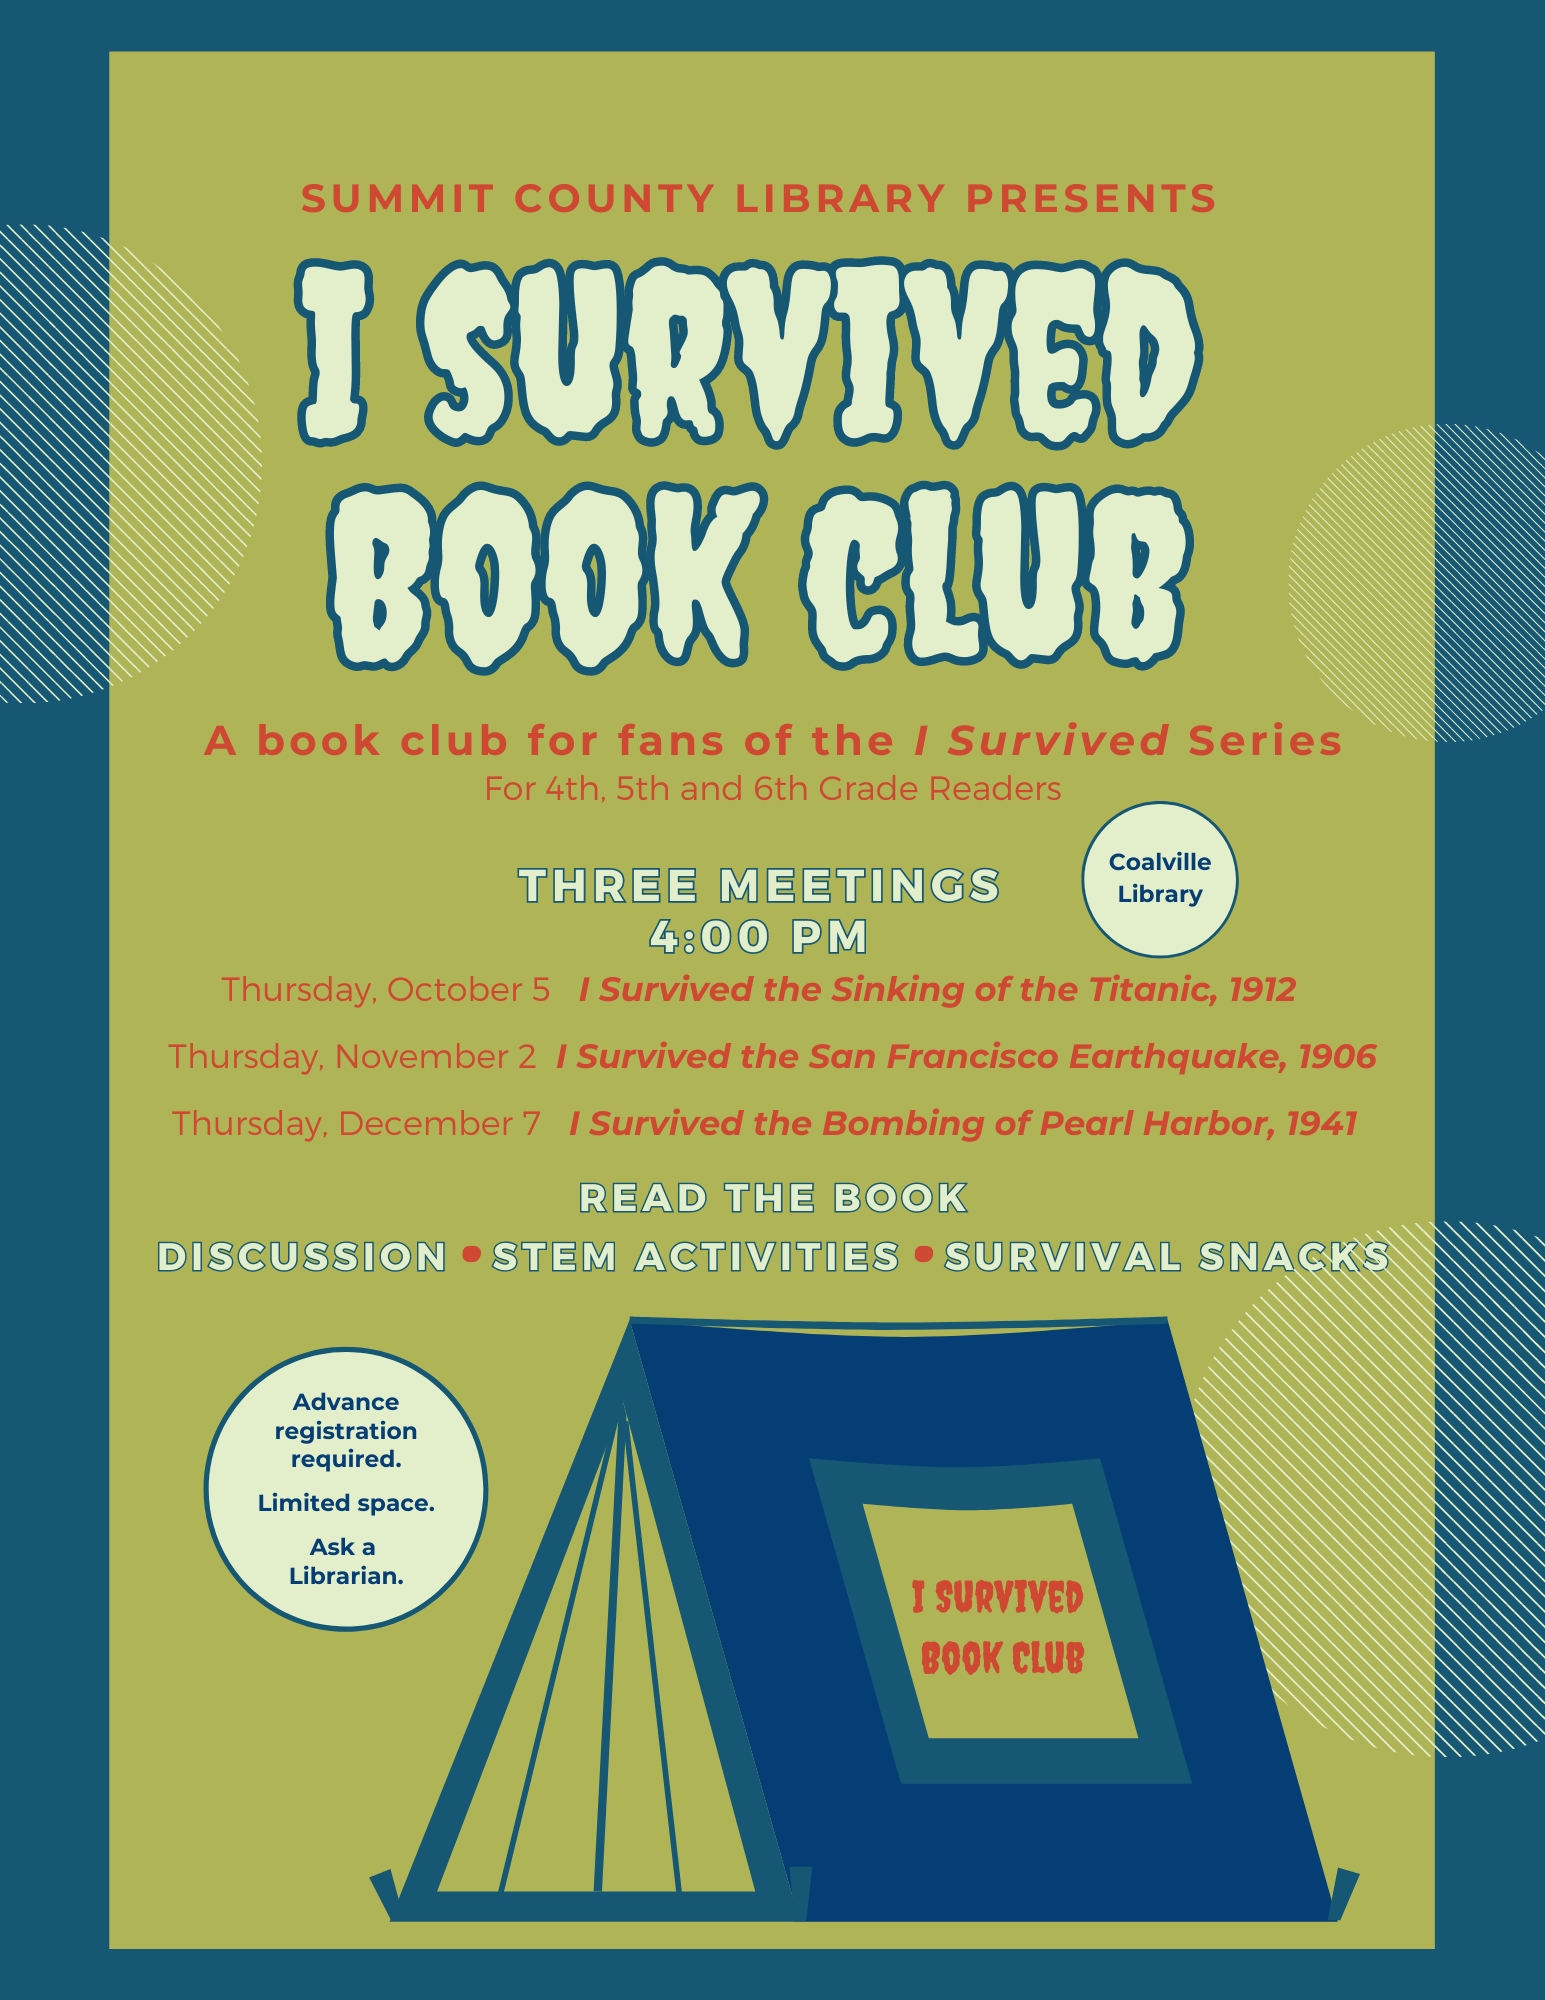 I Survived Book Club at Coalville